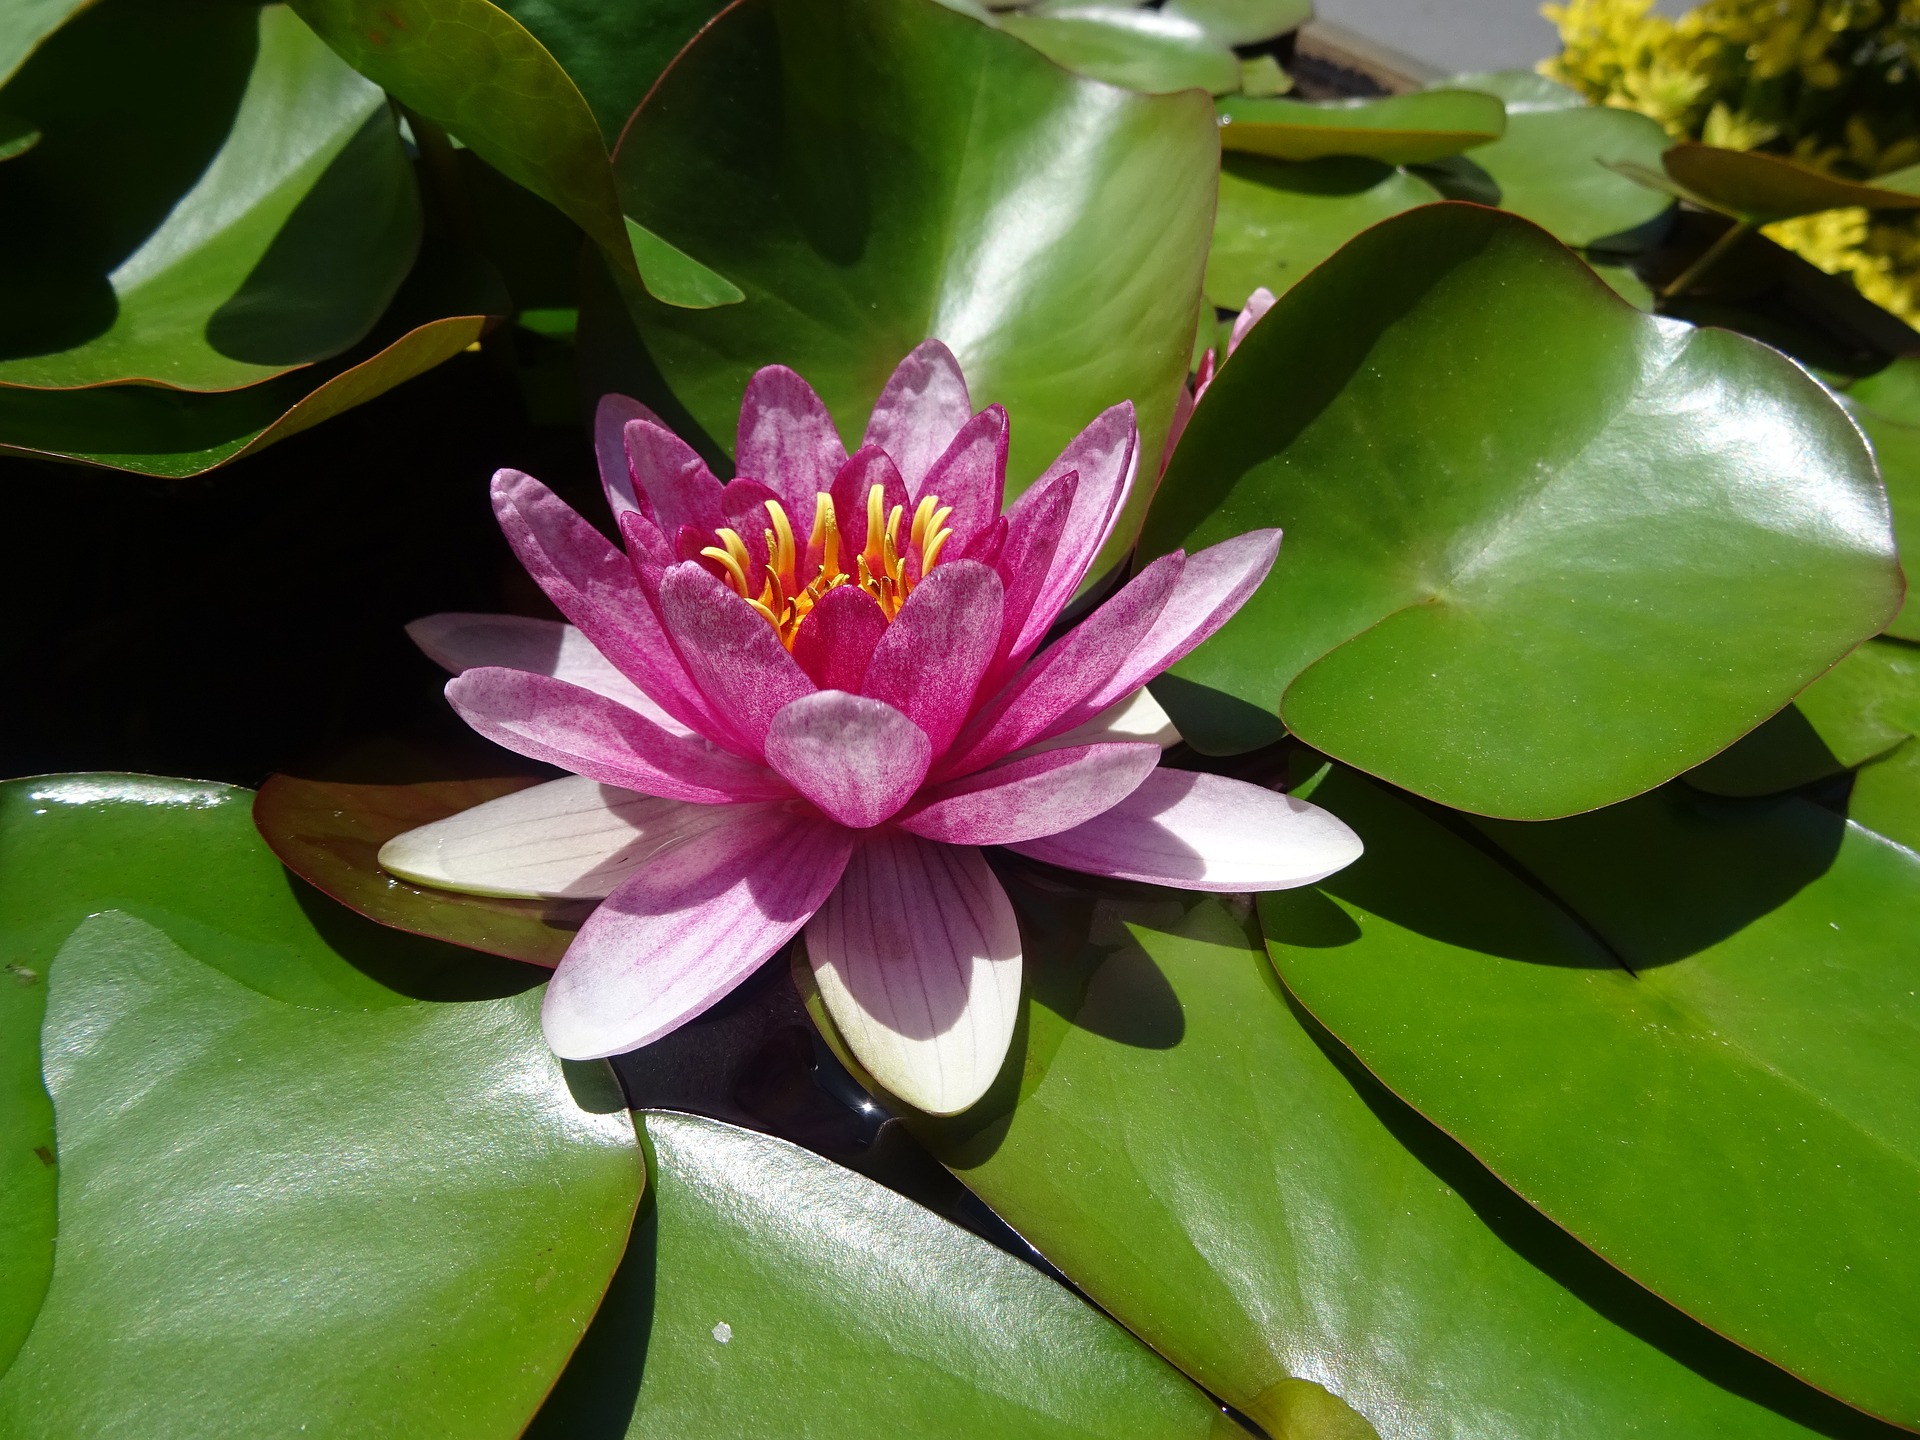 Water lilies 904857 1920